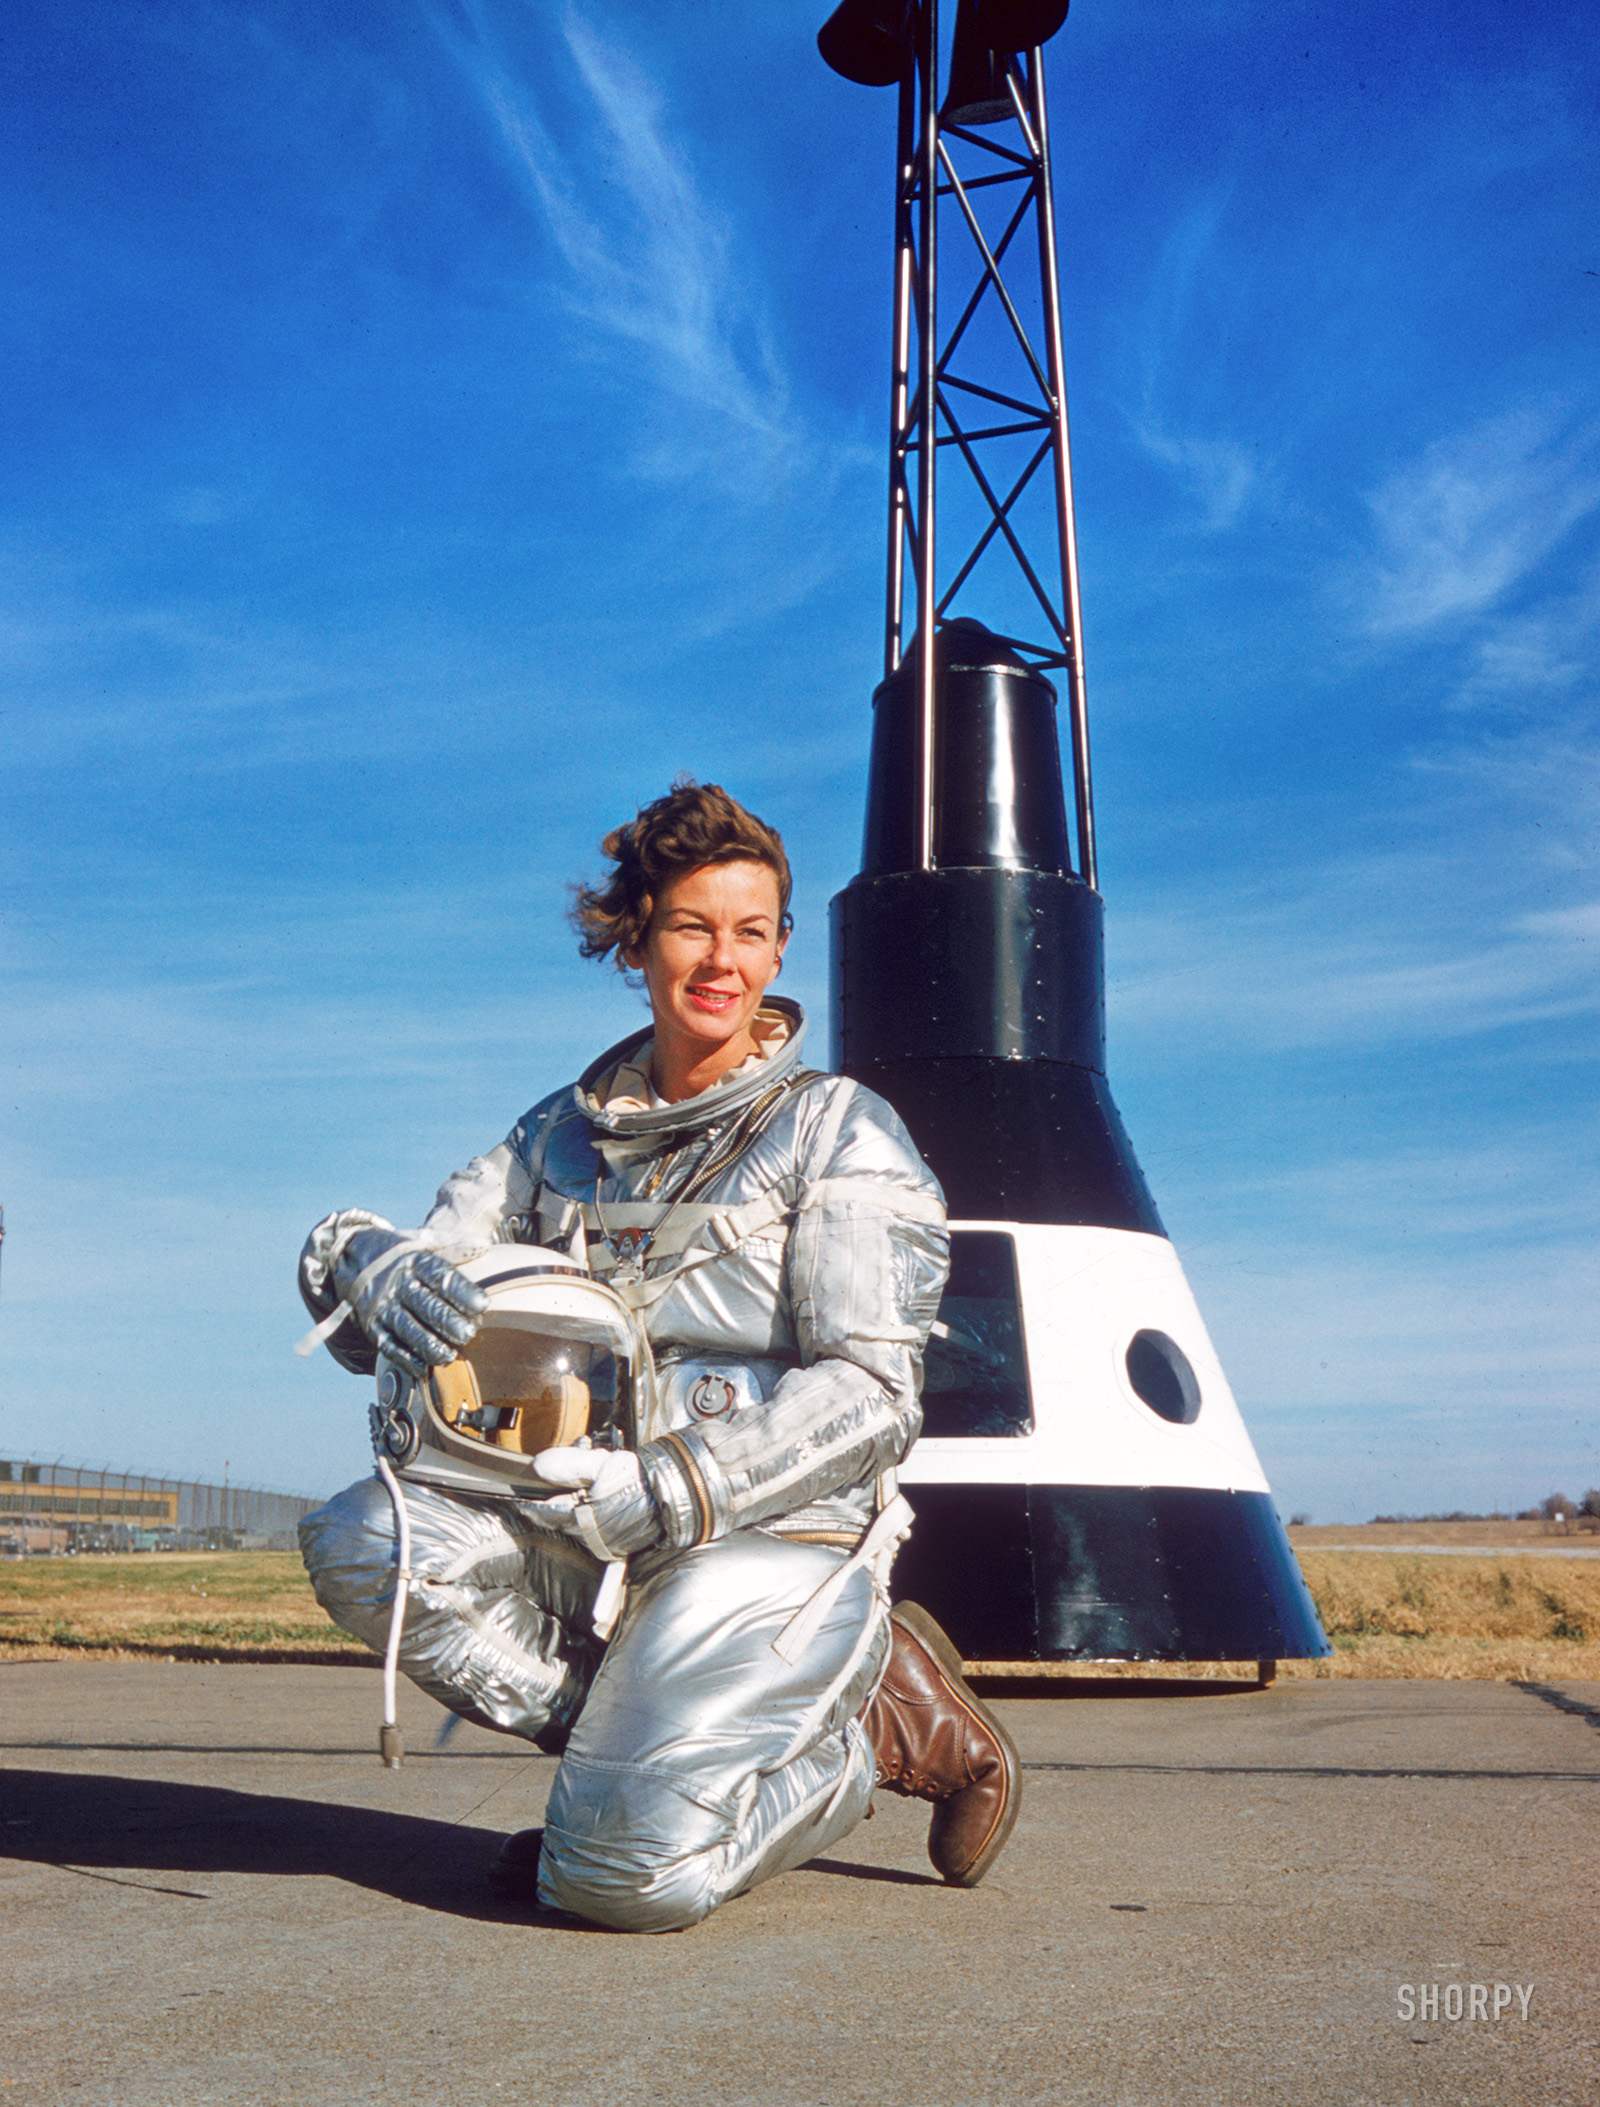 October 1959. "Pilot and auto test driver Betty Skelton at McDonnell Aircraft Corp., St. Louis. She is undergoing a multitude of physiological tests to assess her fitness to become an astronaut." 35mm Kodachrome by Bob Sandberg for the Look magazine assignment "Girl Astronaut -- Lady wants to orbit." View full size.